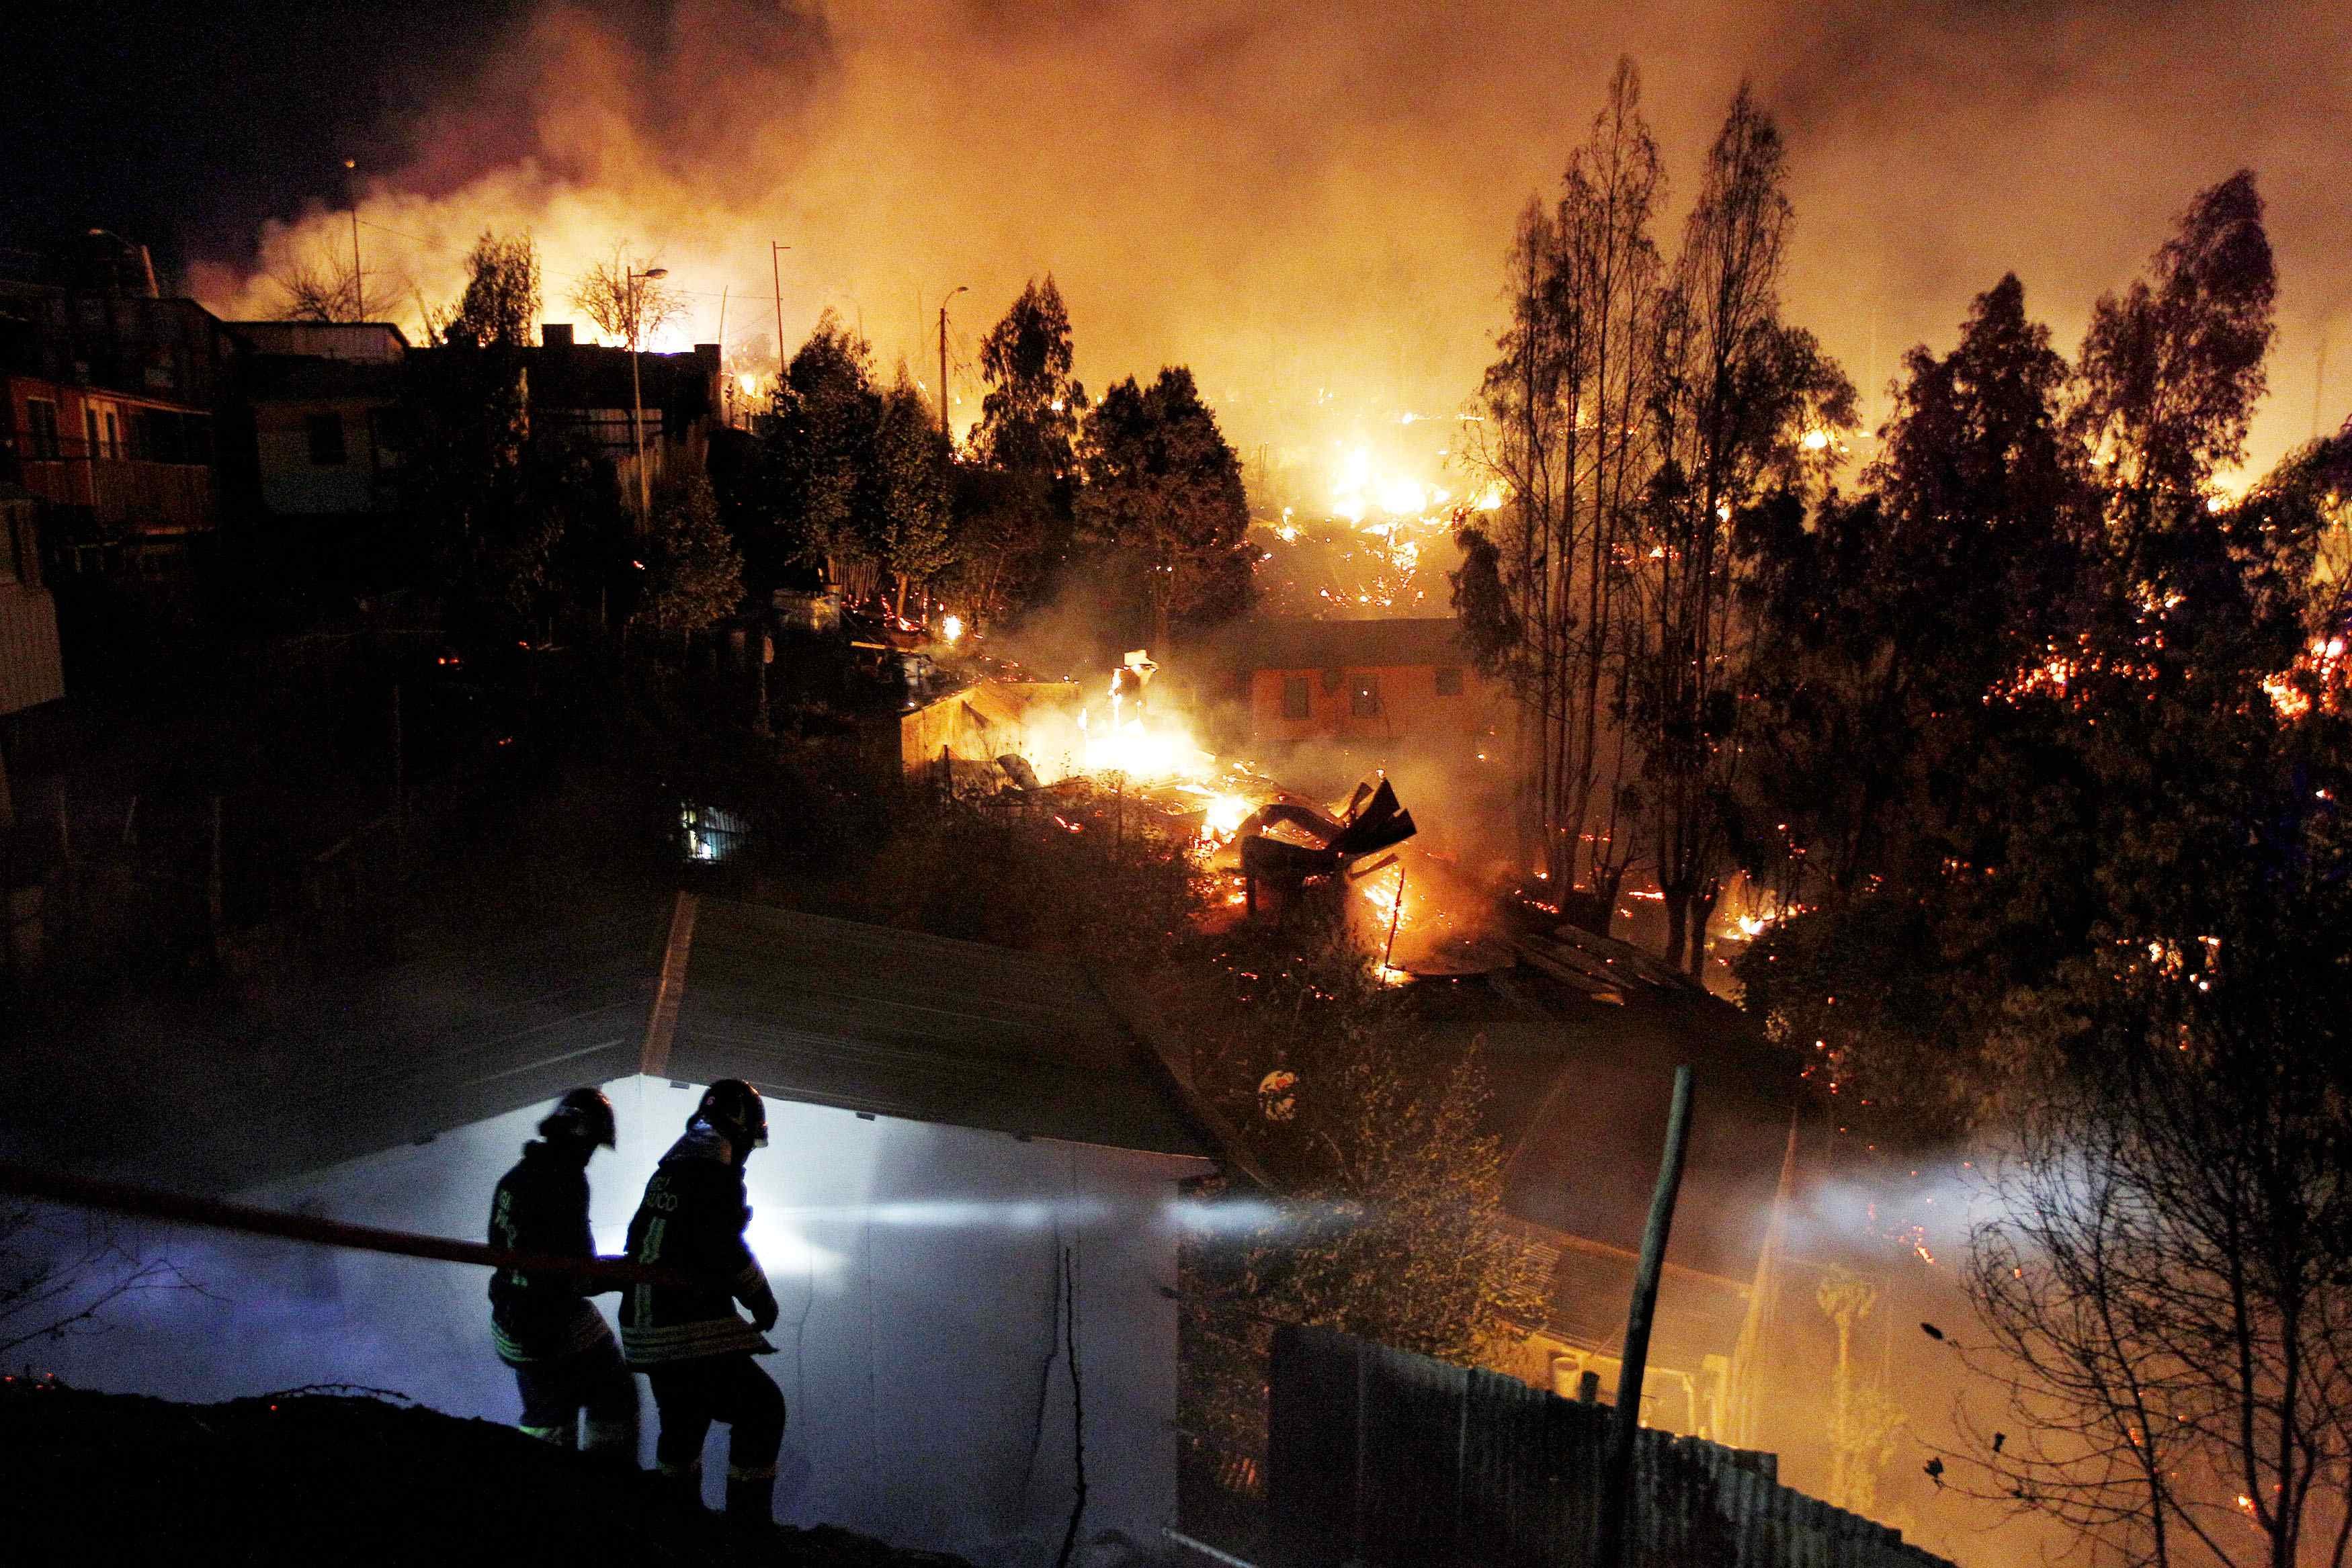 Apr. 13, 2014. Firefighters work to put out a fire in Valparaiso city, northwest of Santiago. At least 12 people were killed and 2,000 houses destroyed over the weekend by a fire that devastated parts of the Chilean port city of Valparaiso, as authorities evacuated thousands and sent in aircraft to battle the blaze.